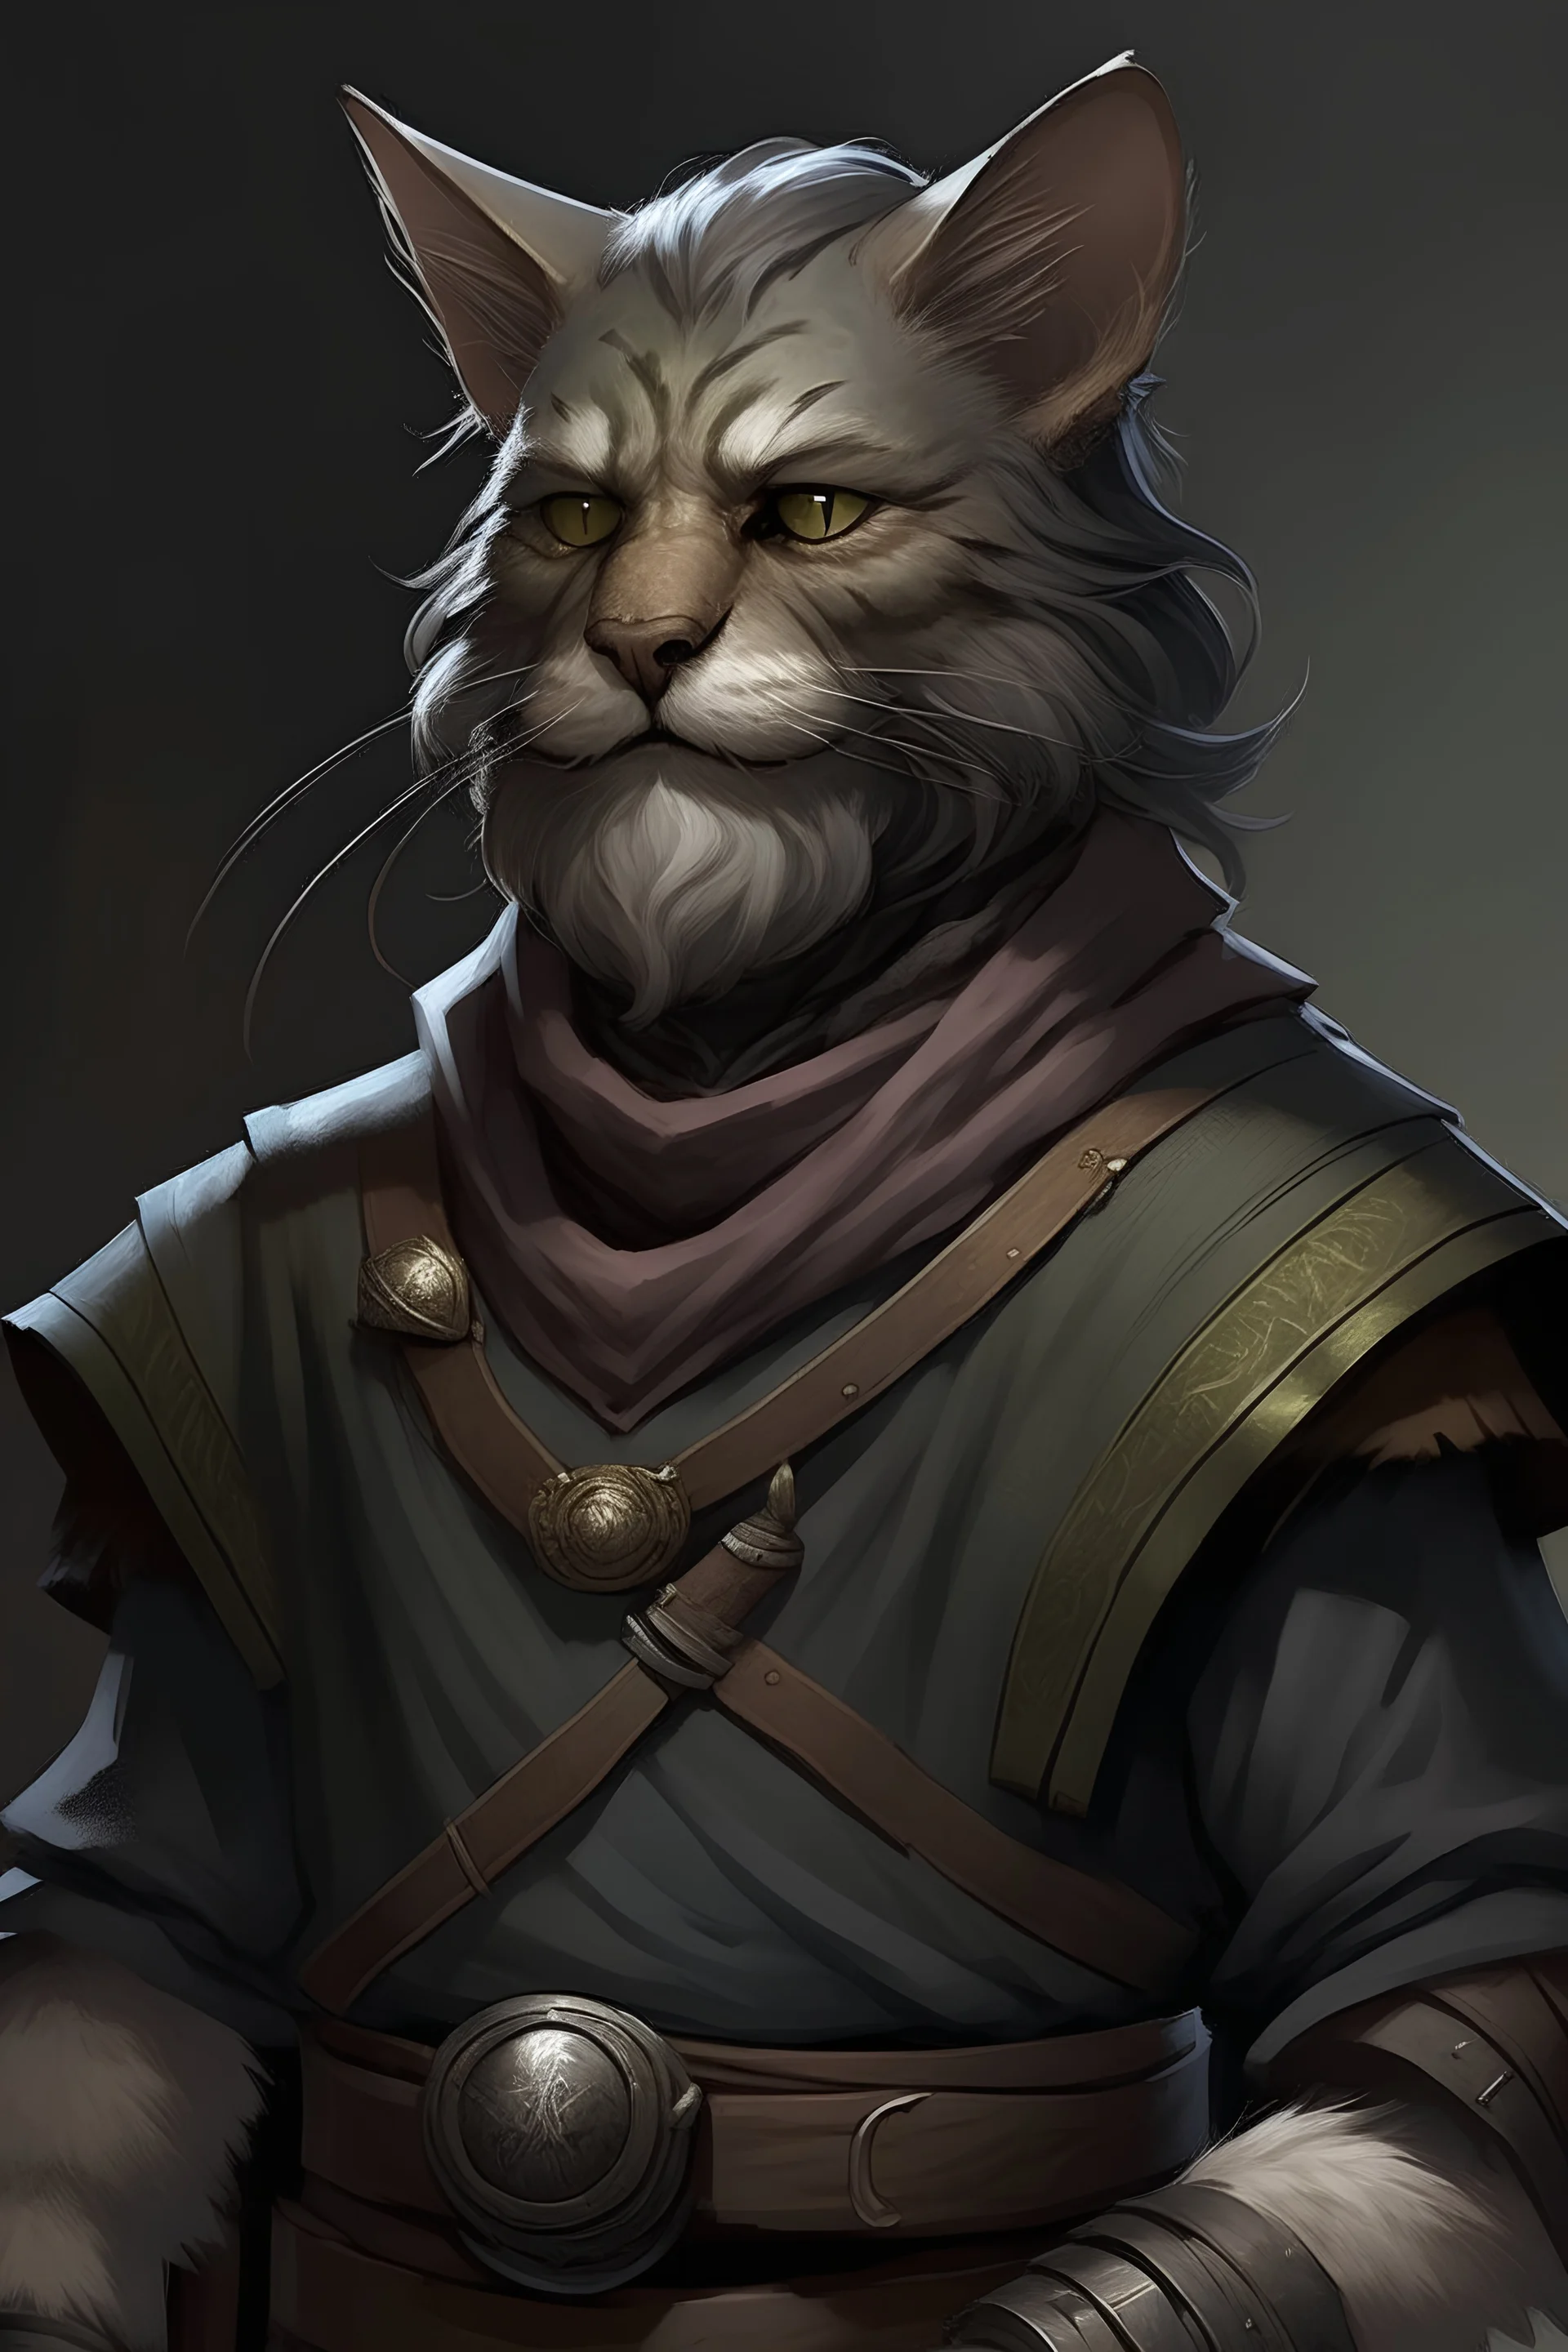 grey scruffy old man Tabaxi khajit with wizened beard with crocked and bent whiskers scout rogue wearing leather armor